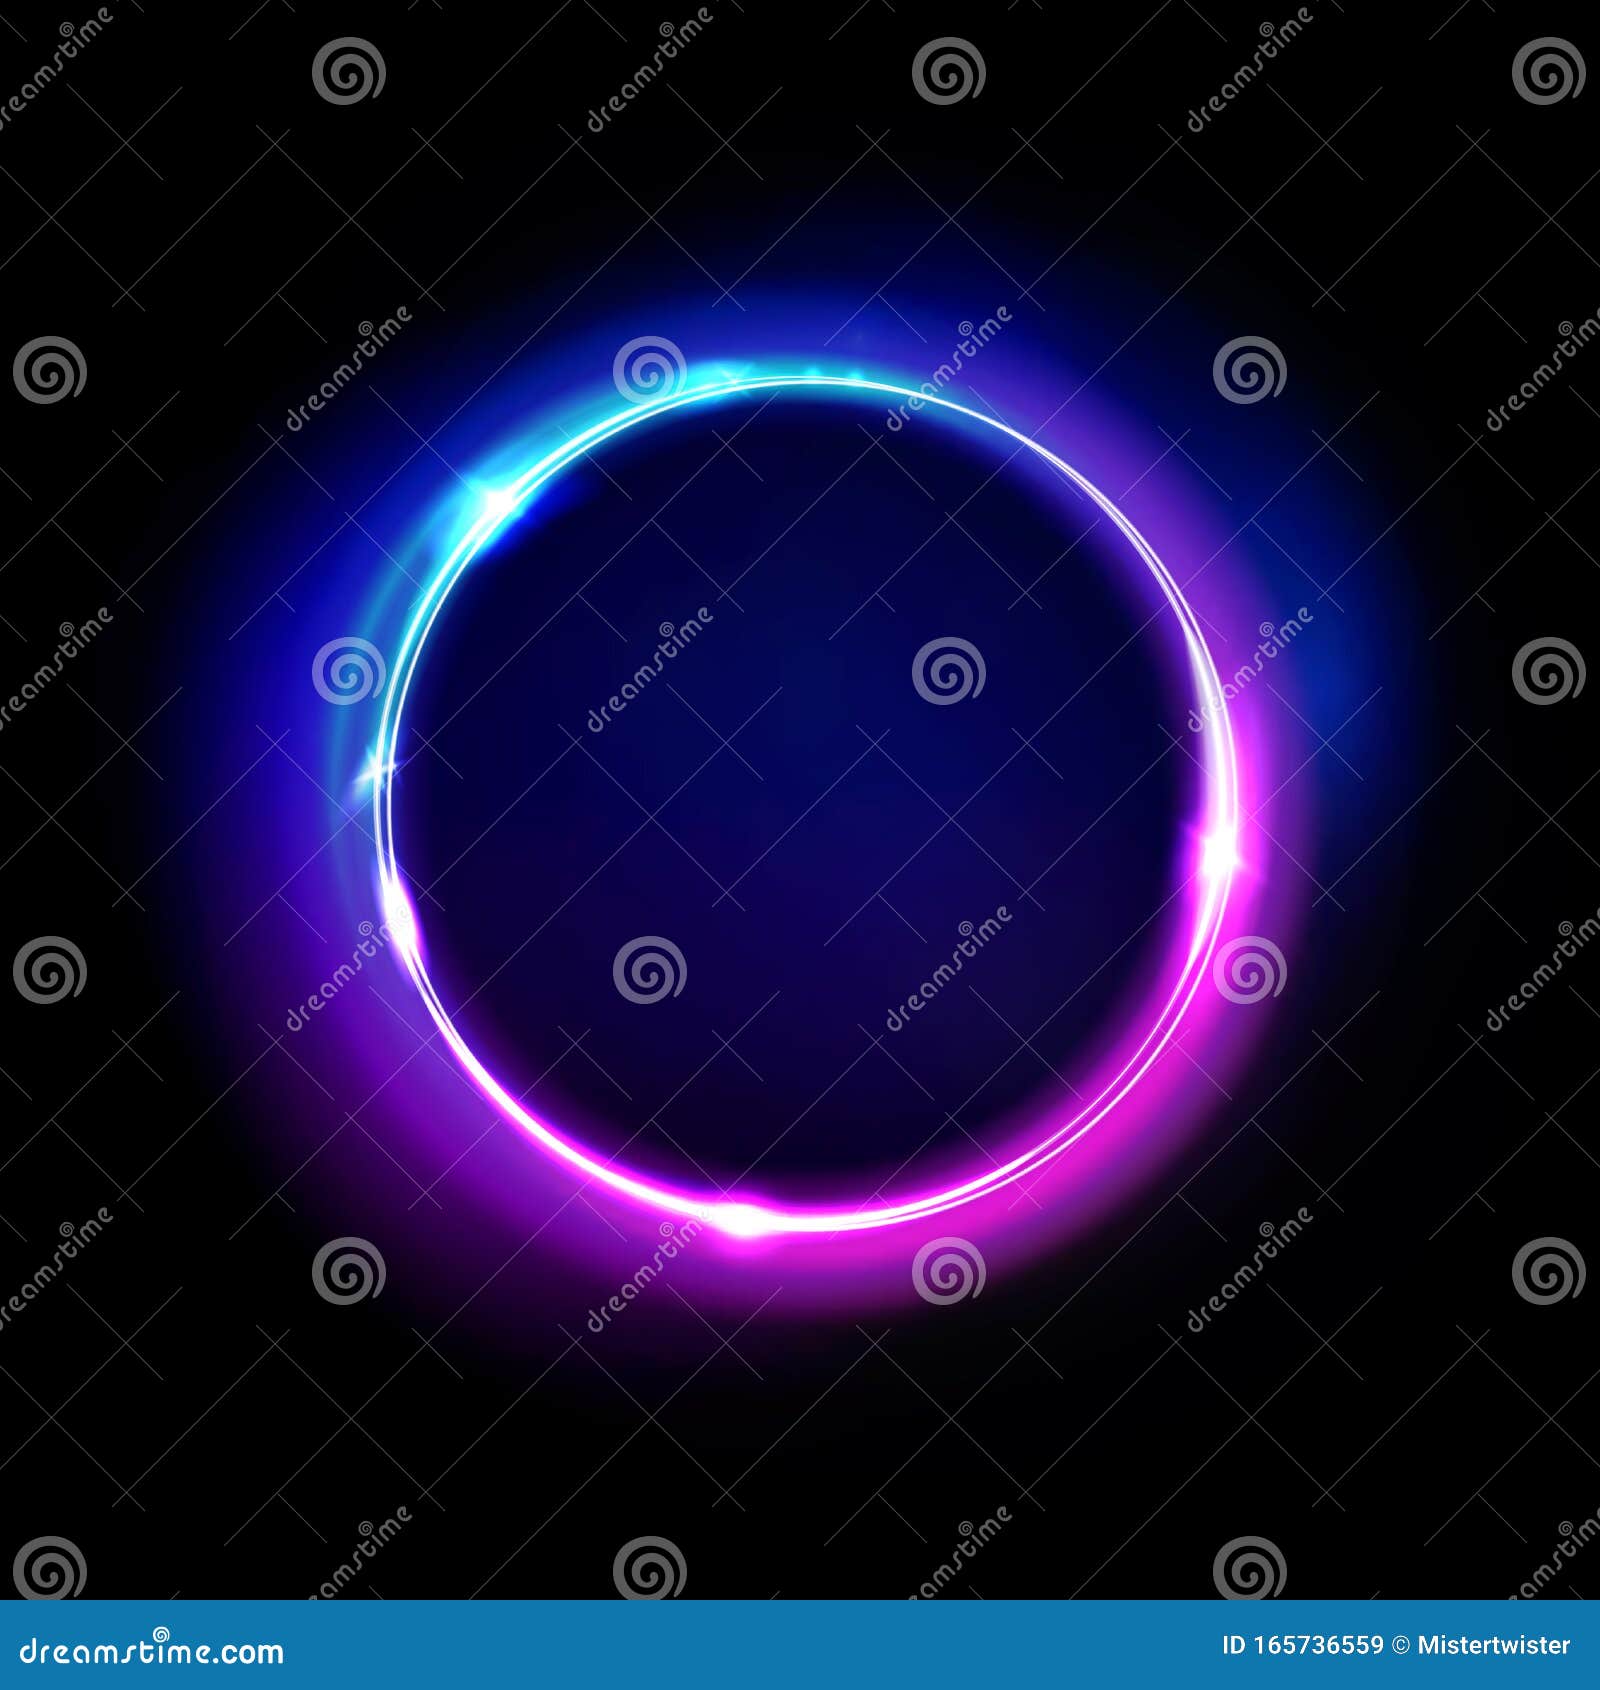 neon circle sign . light and glow round frame  on black background. purple, violet, blue and pink electric